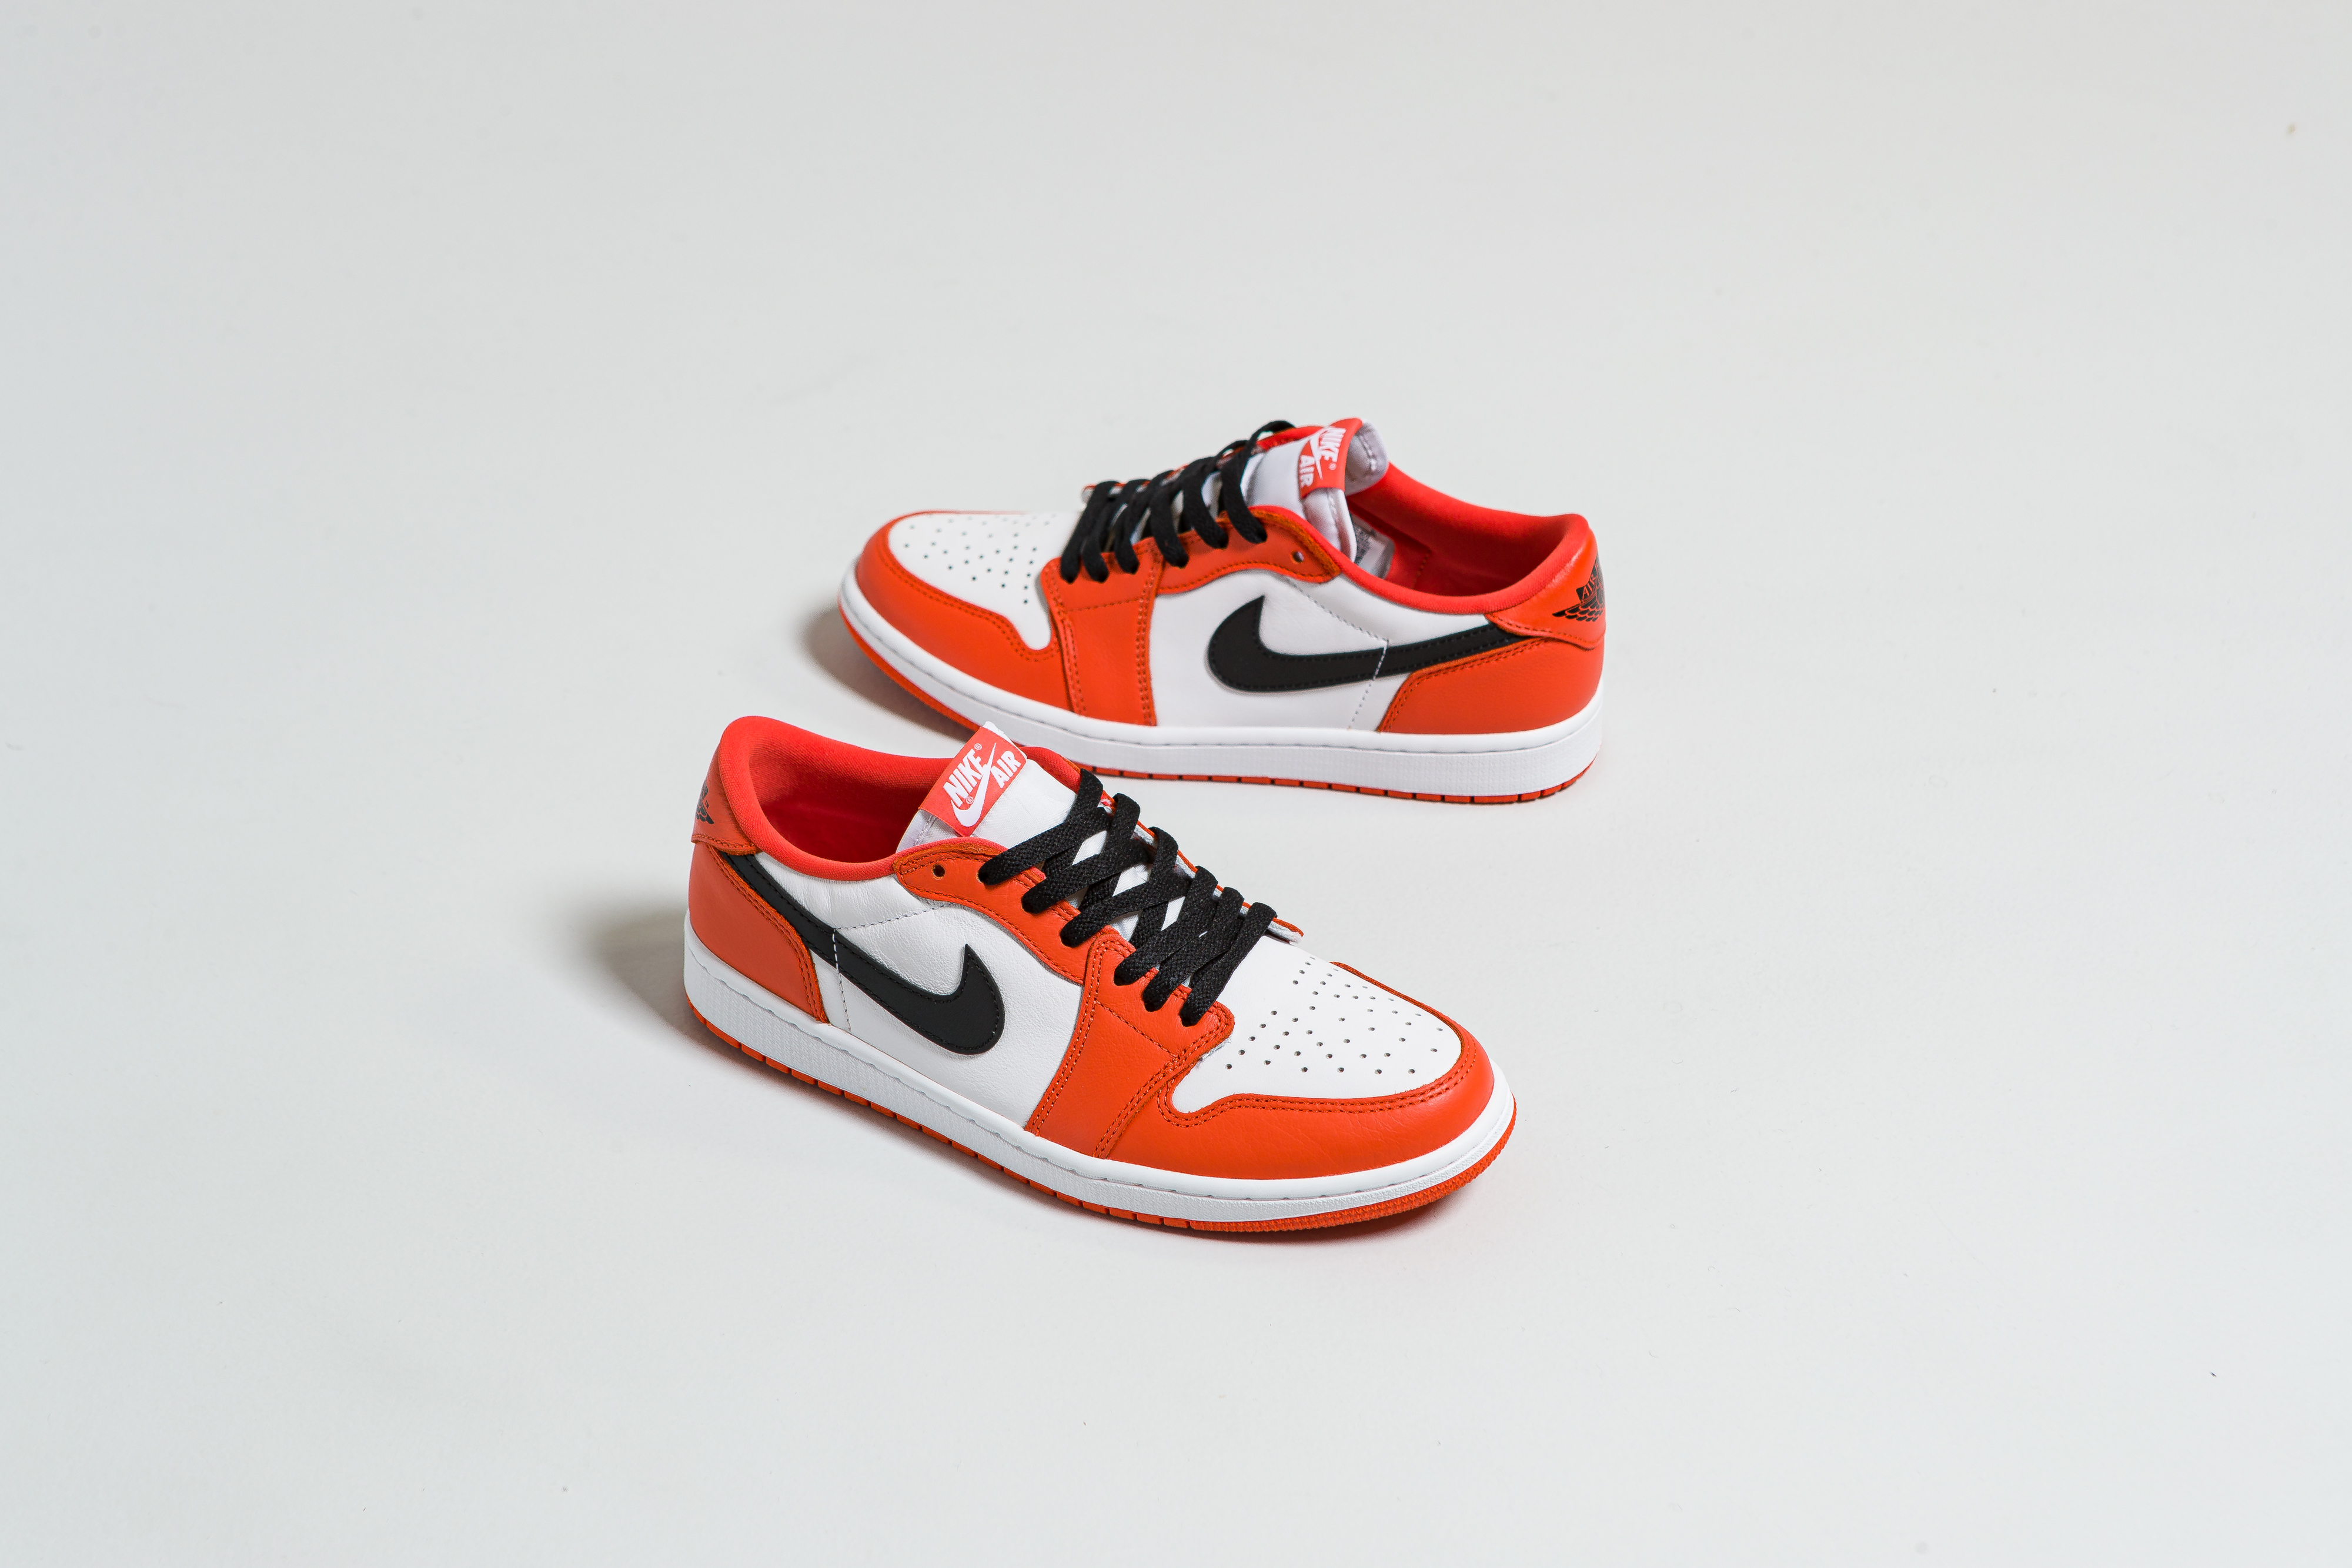 Up There Launches - Nike Air Jordan 1 Low ‘Shattered Backboard’ ‘Starfish’